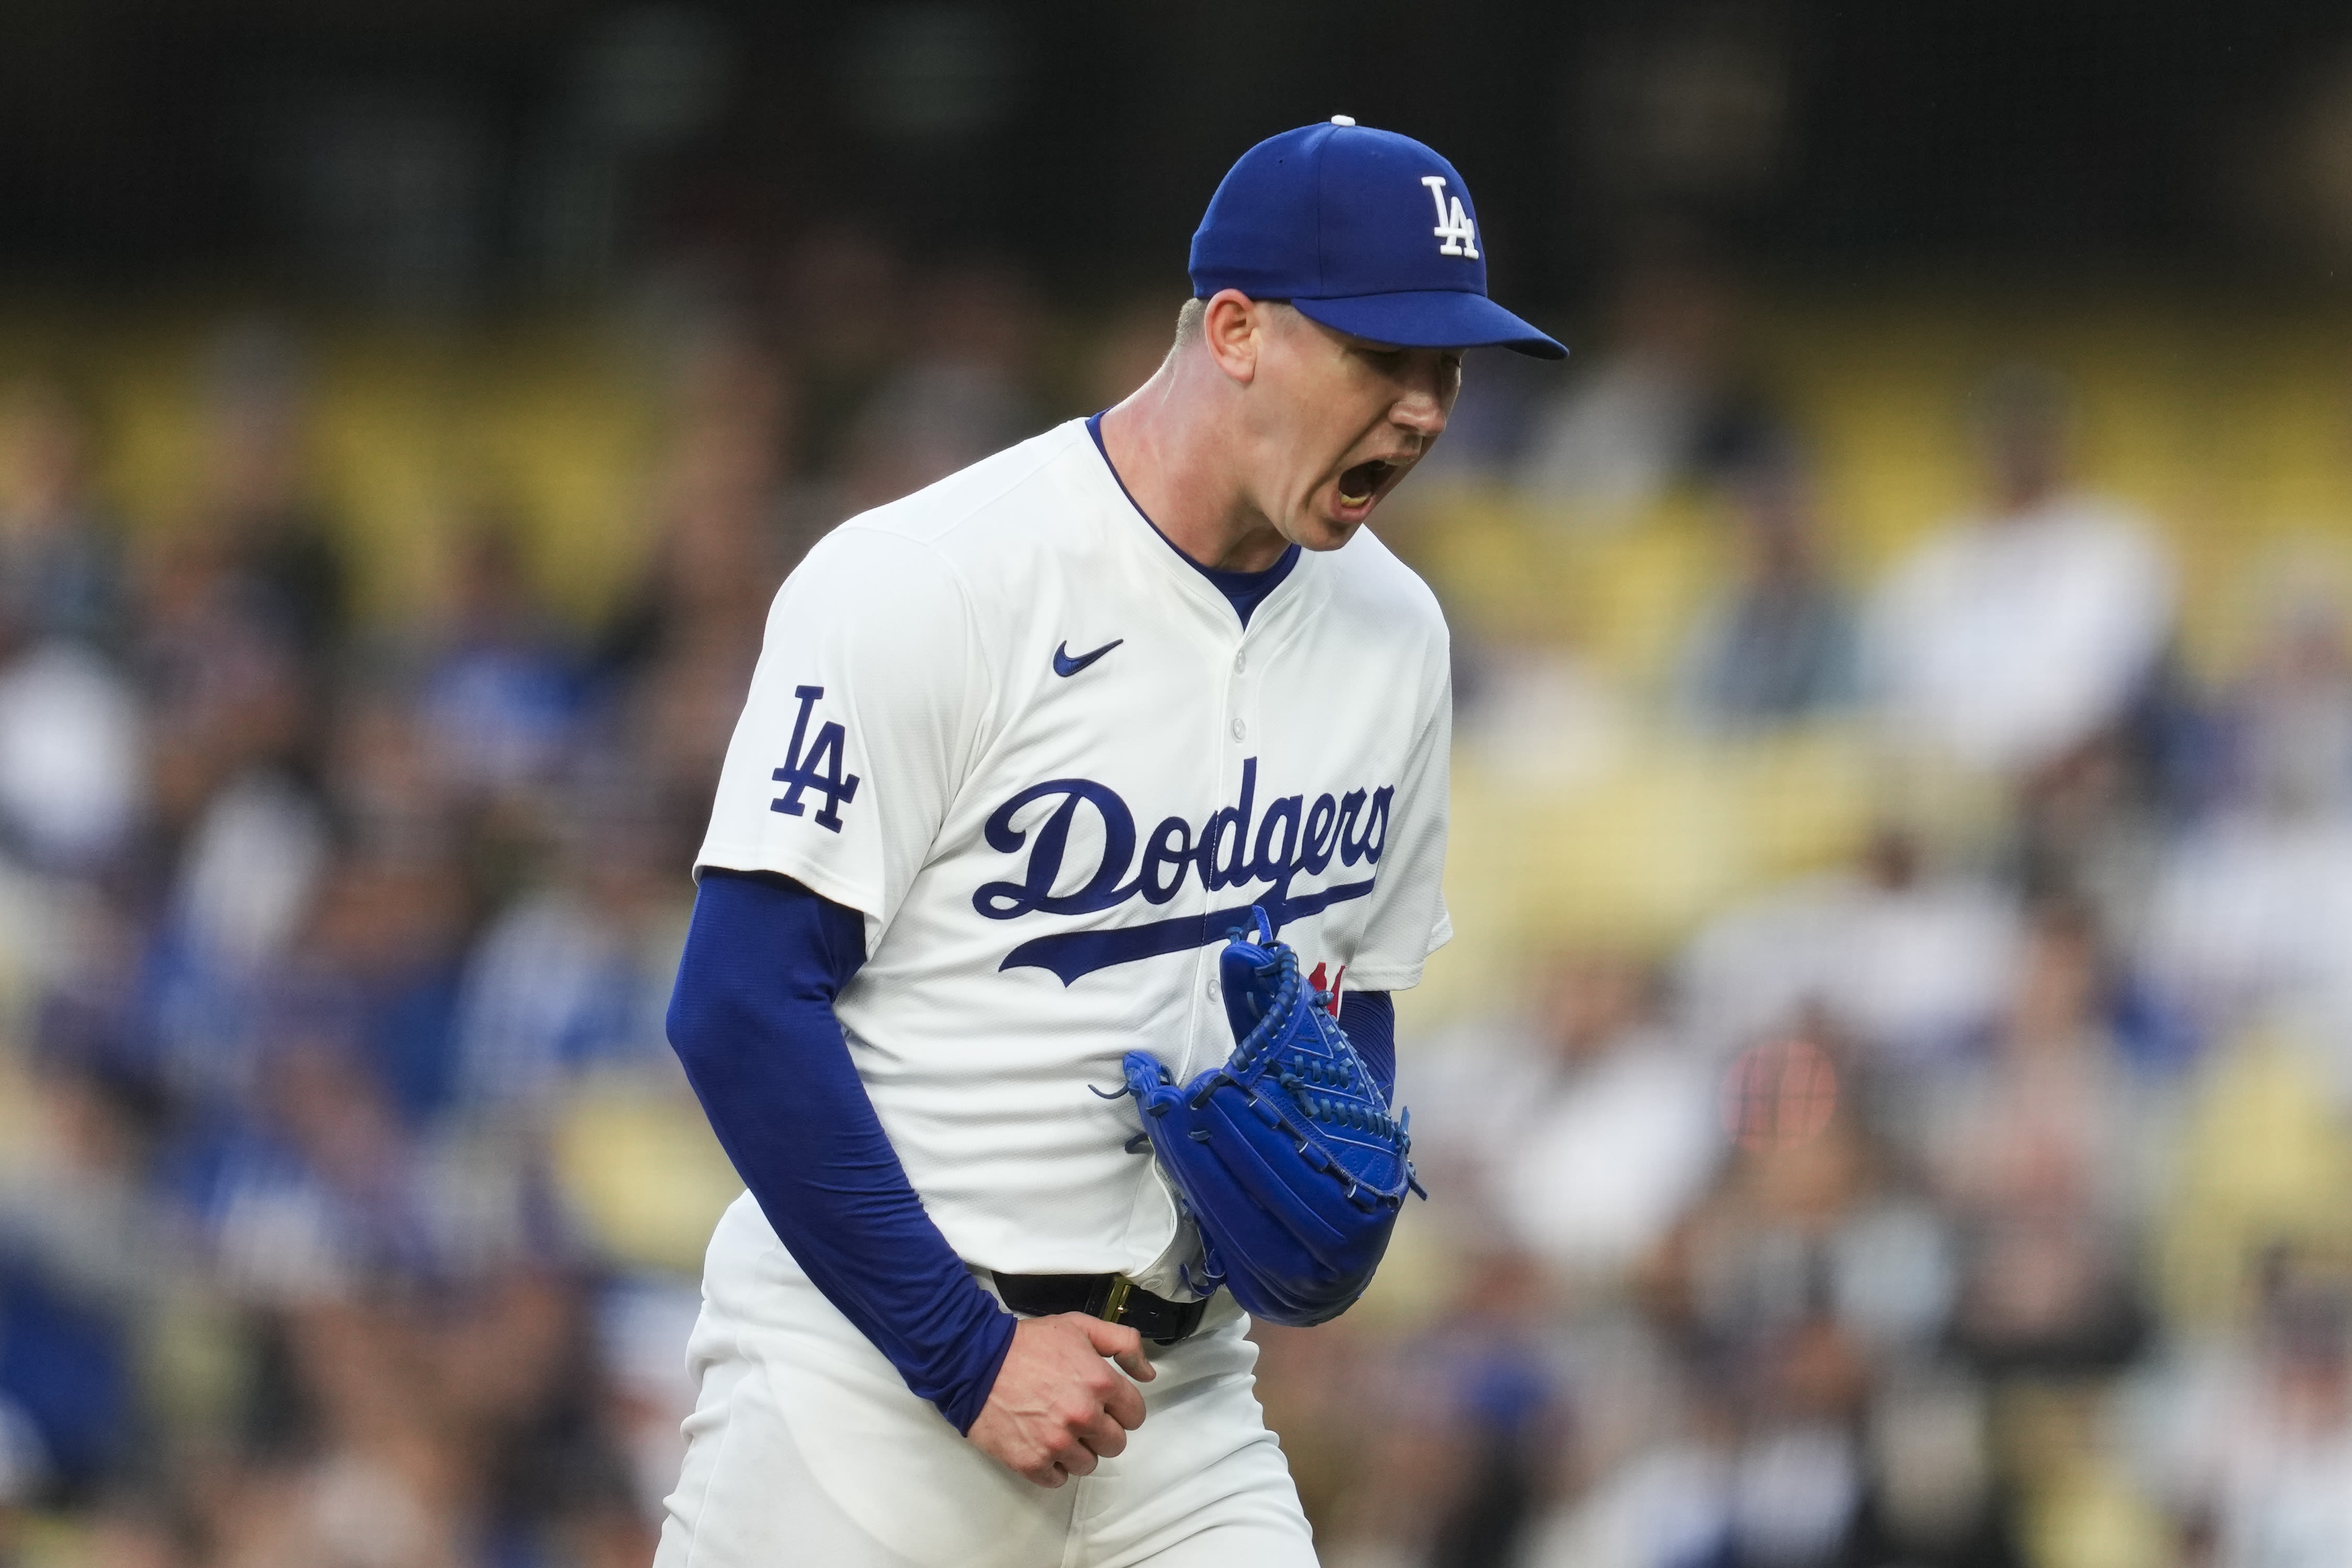 Dodgers hitters befuddled by Colorado pitching as winning streak ends